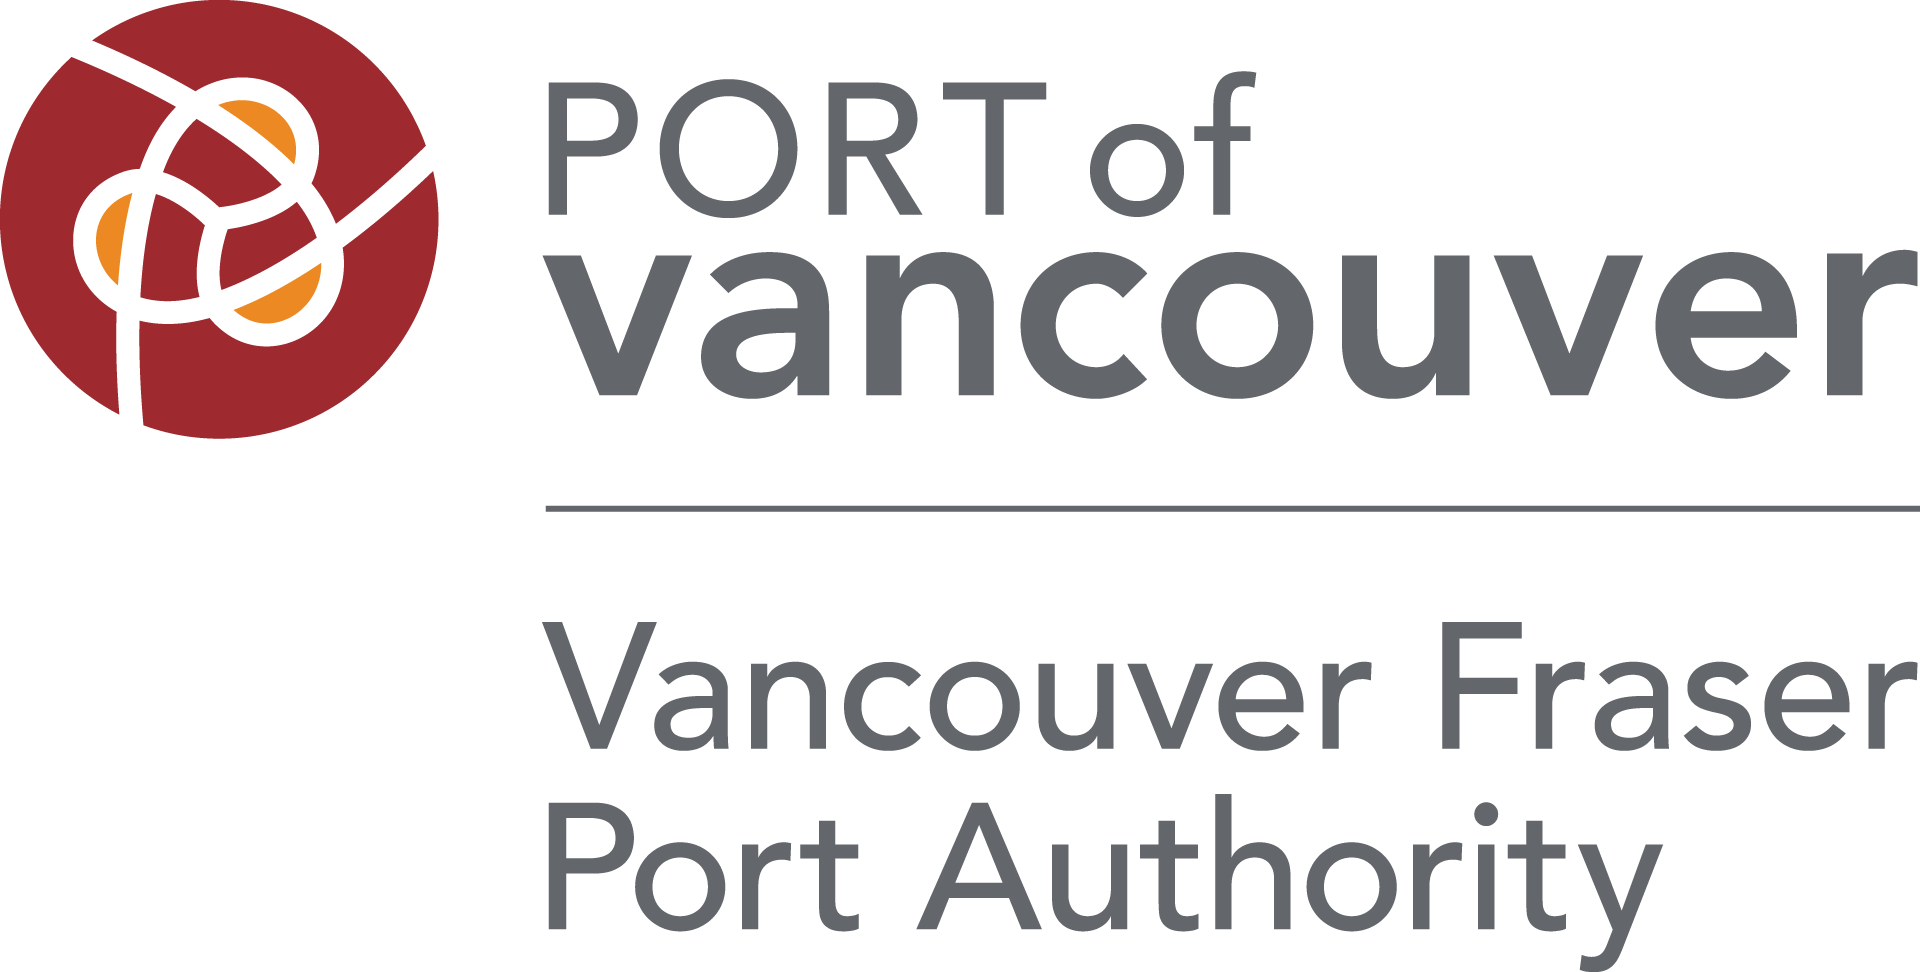 Port-of-Vancouver-logo-vertical-for-white-backgrounds